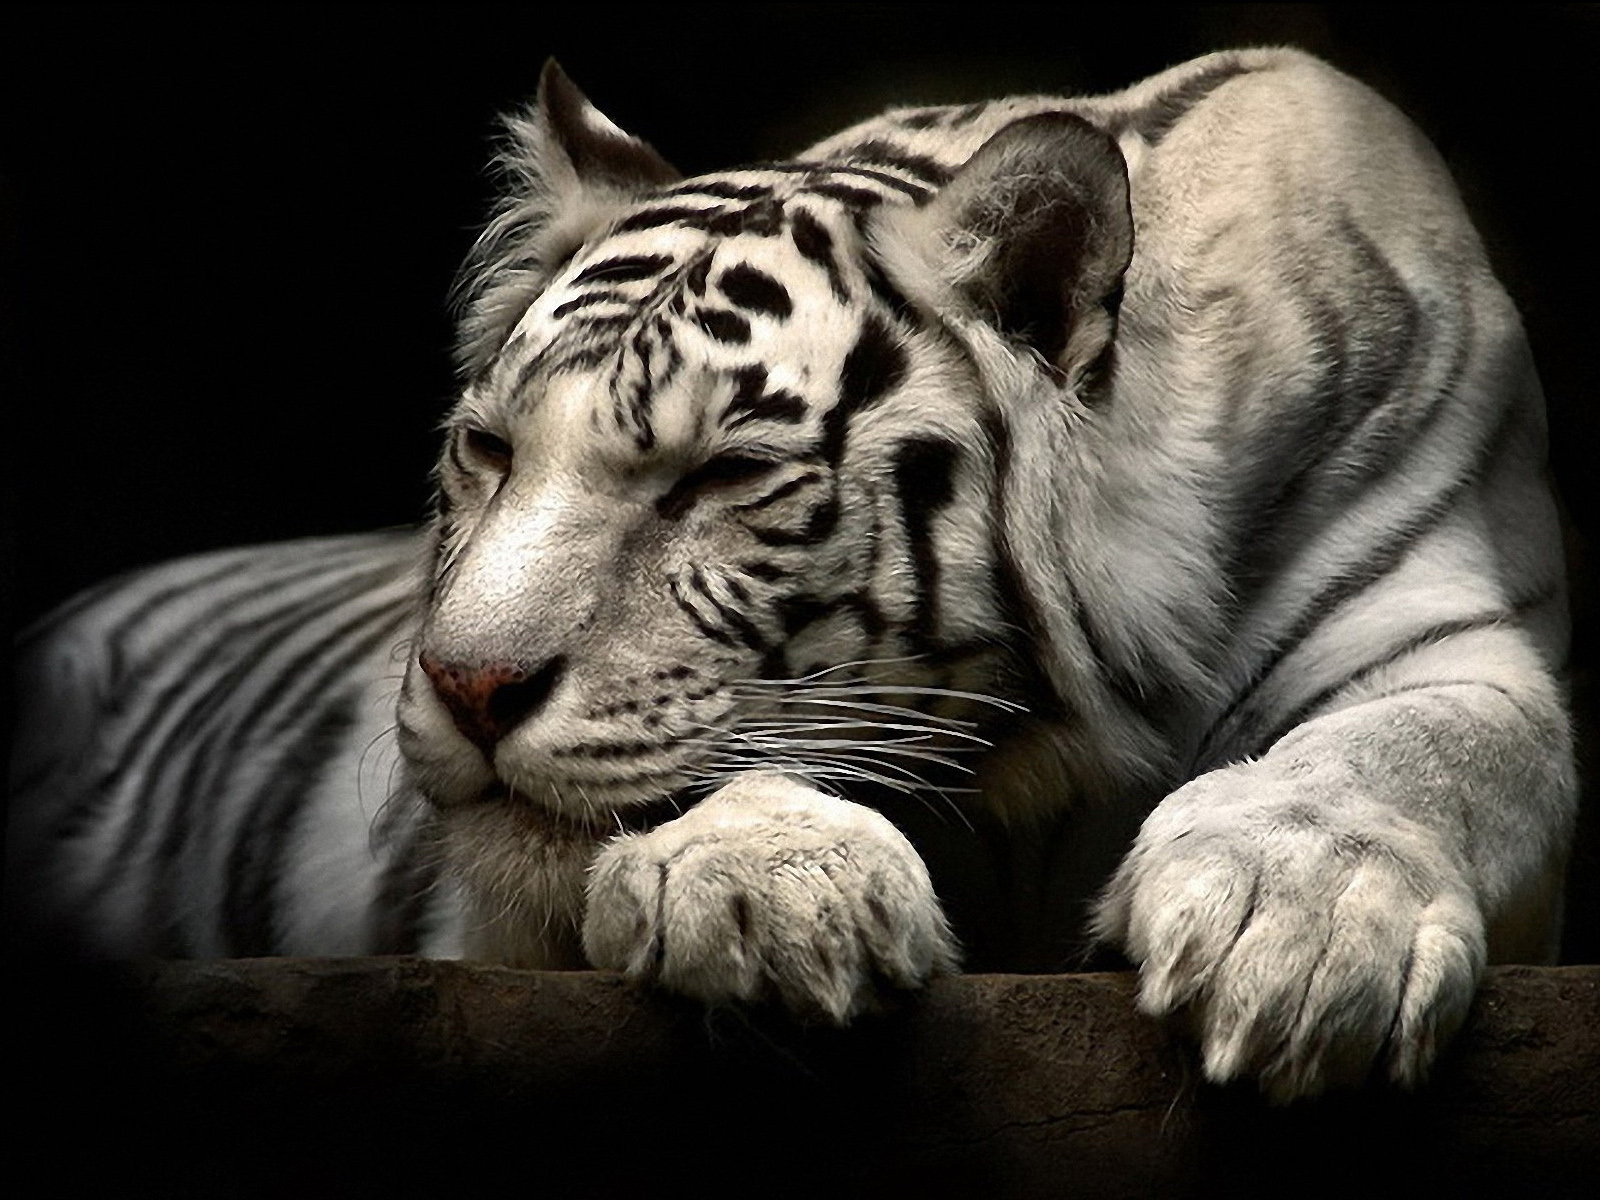 White Tiger Computer Wallpapers, Desktop Backgrounds | 1600x1200 | ID:97962